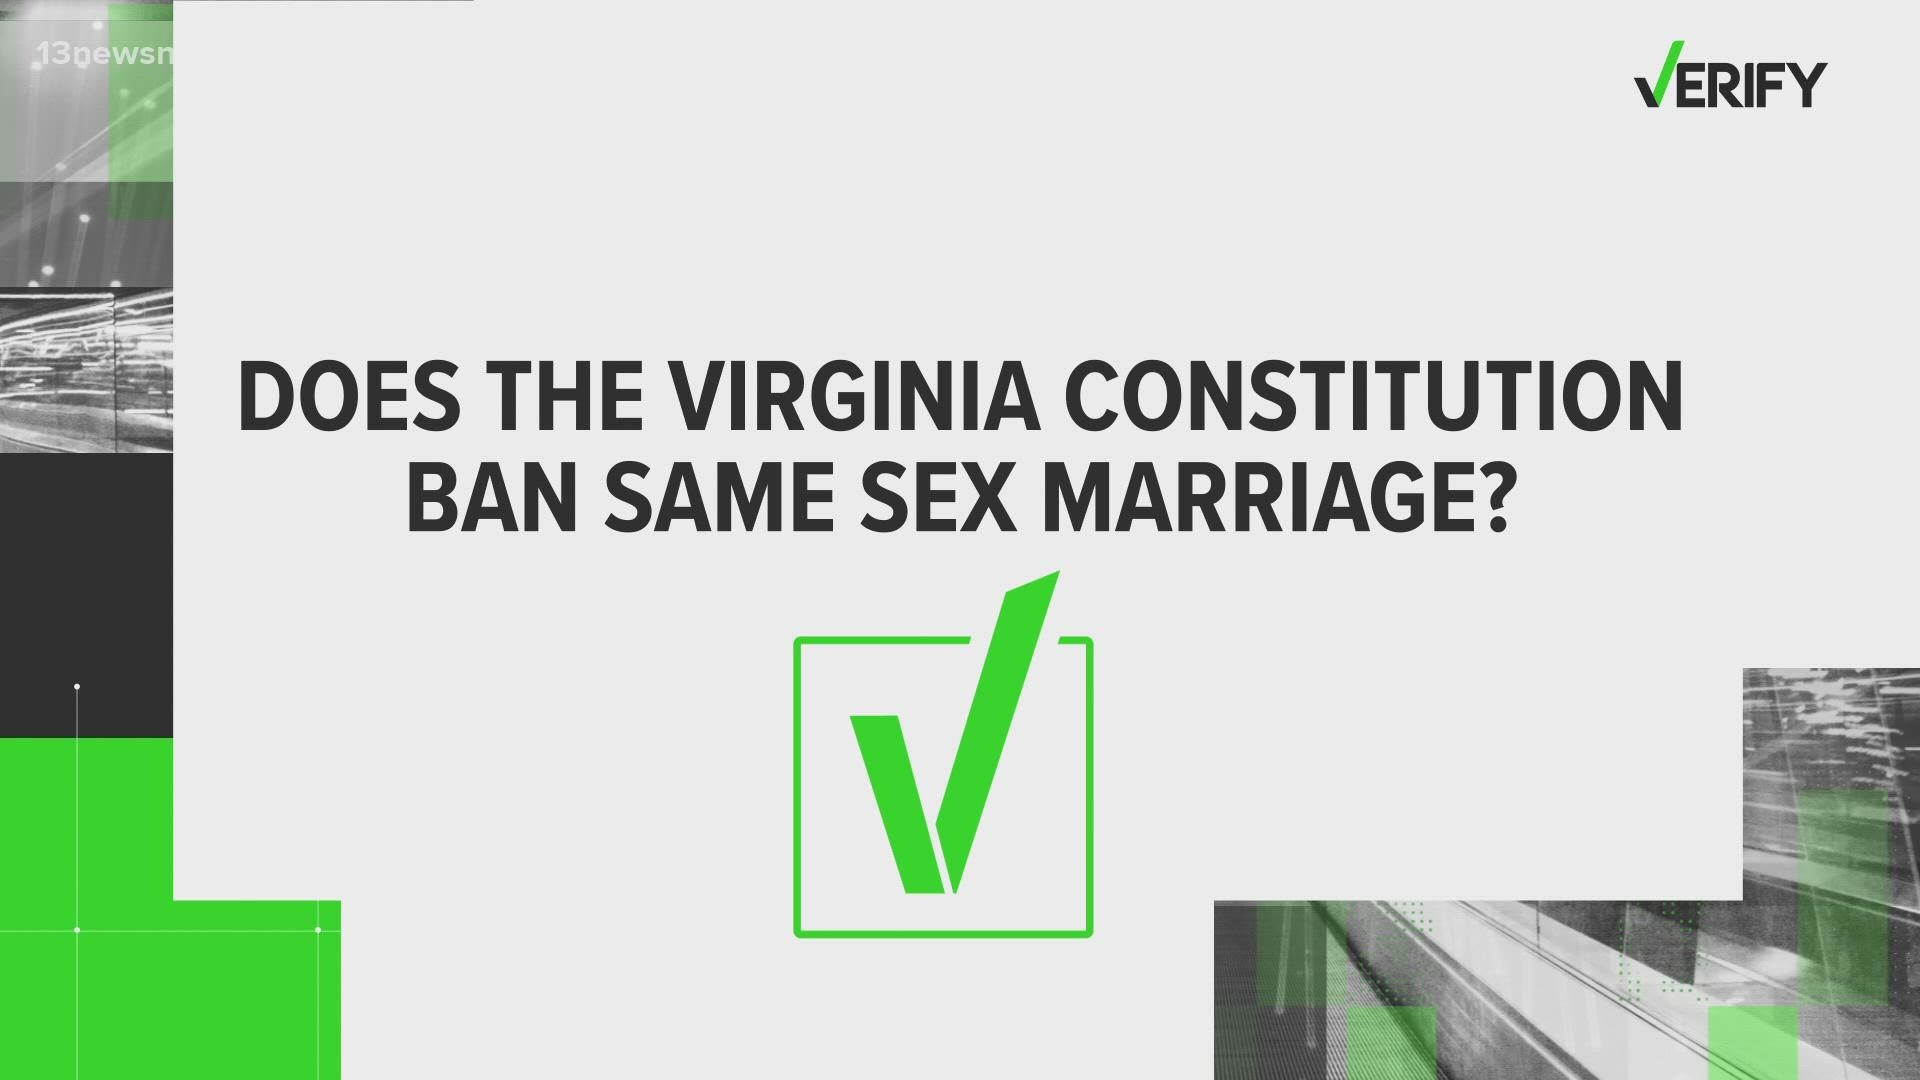 Virginia's constitution bans same-sex marriages, but its currently unenforceable due to the Supreme Court ruling in Obergefell V. Hodges.